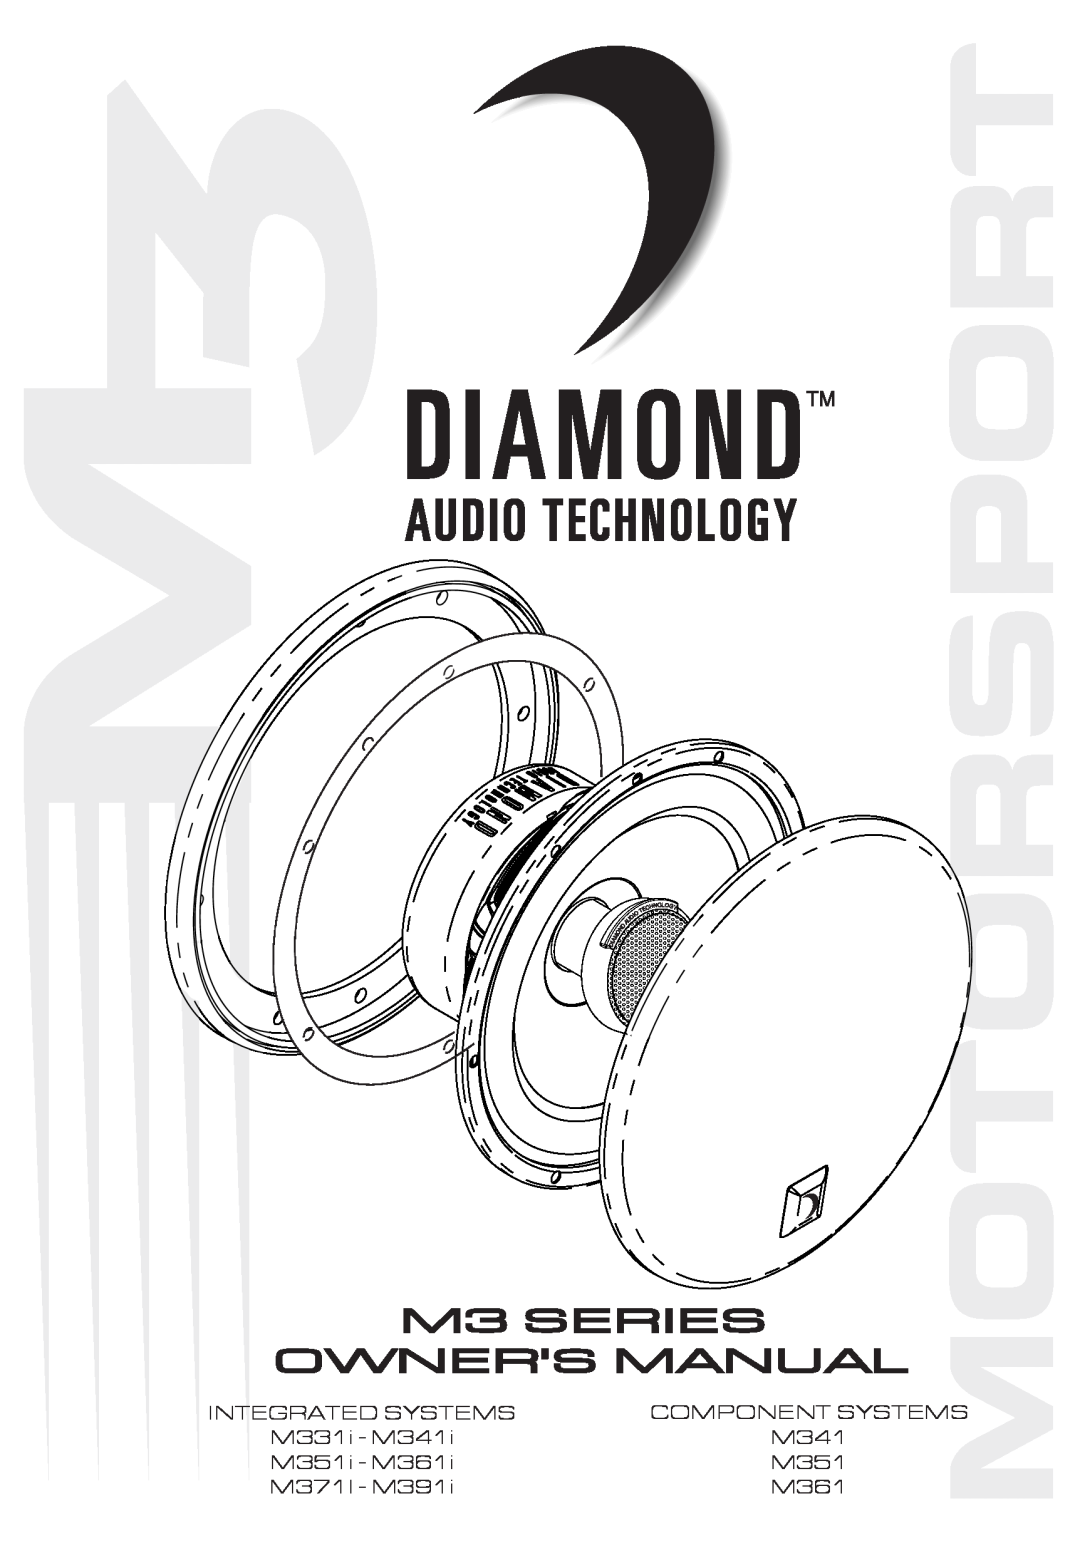 Diamond Audio Technology M331I - M341I owner manual Integrated Systems, Component Systems, M331i - M341i, M351i - M361i 